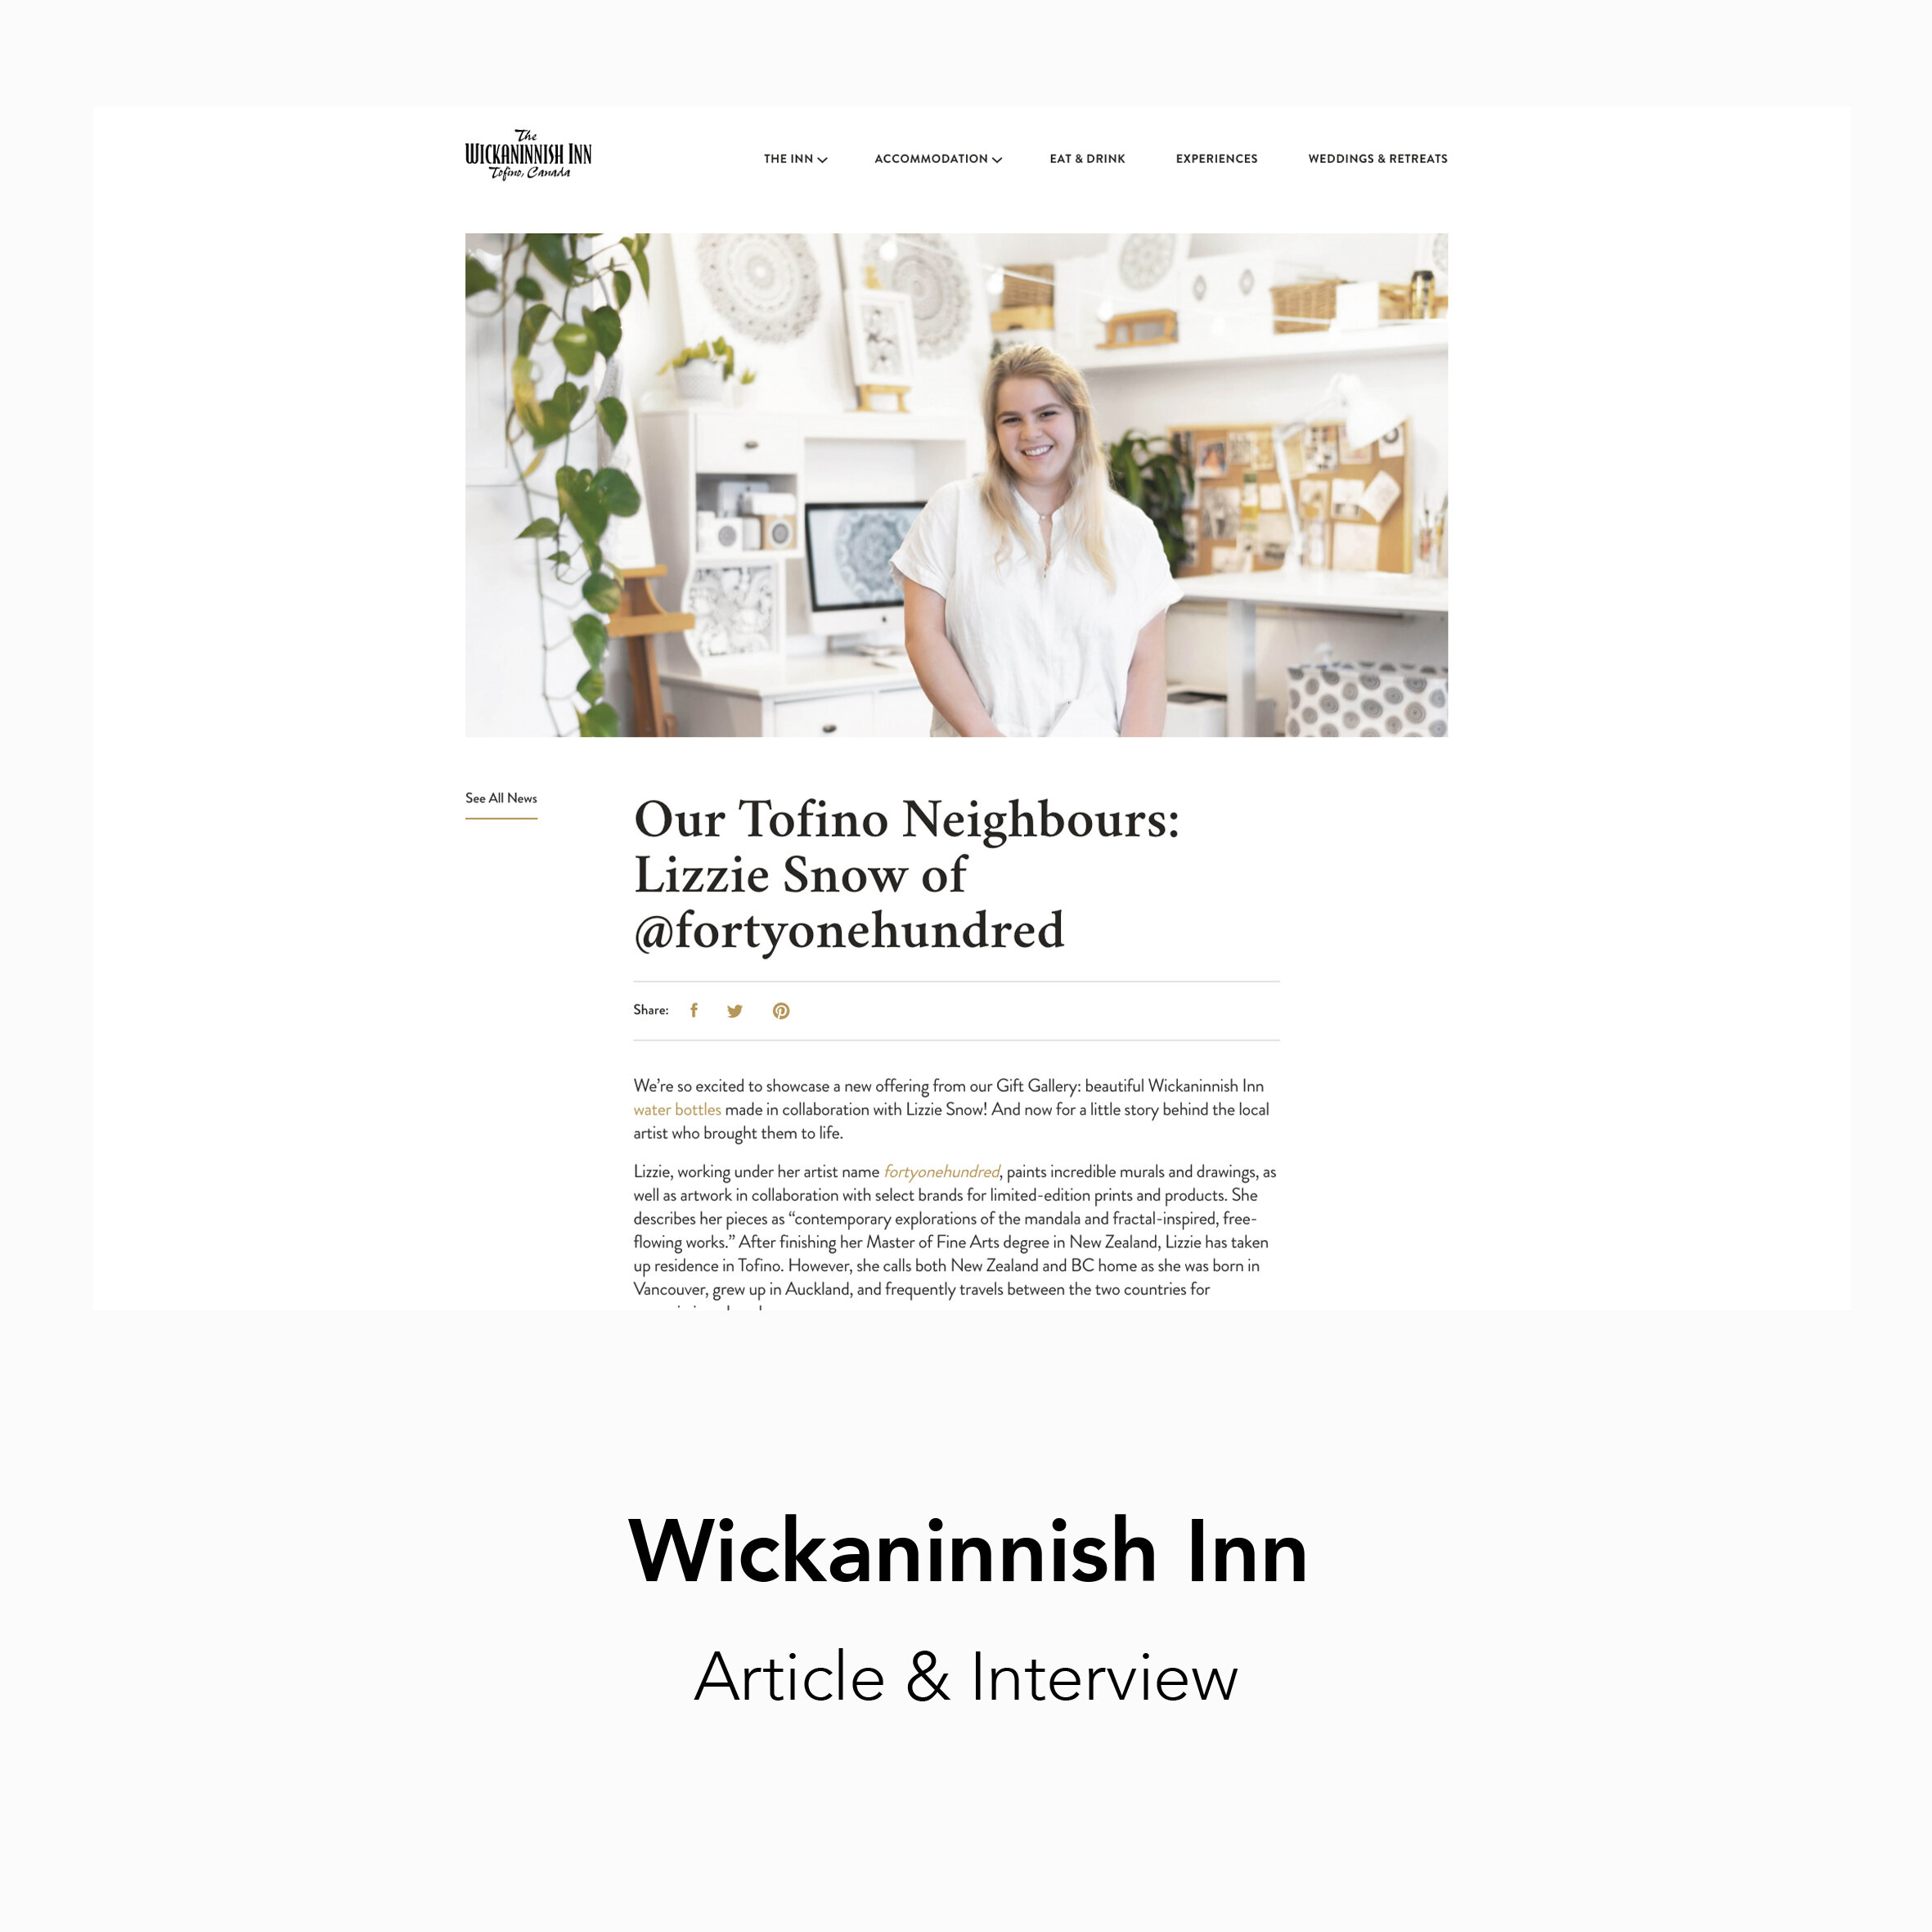 Wickaninnish Inn article on Lizzie Snow fortyonehundred